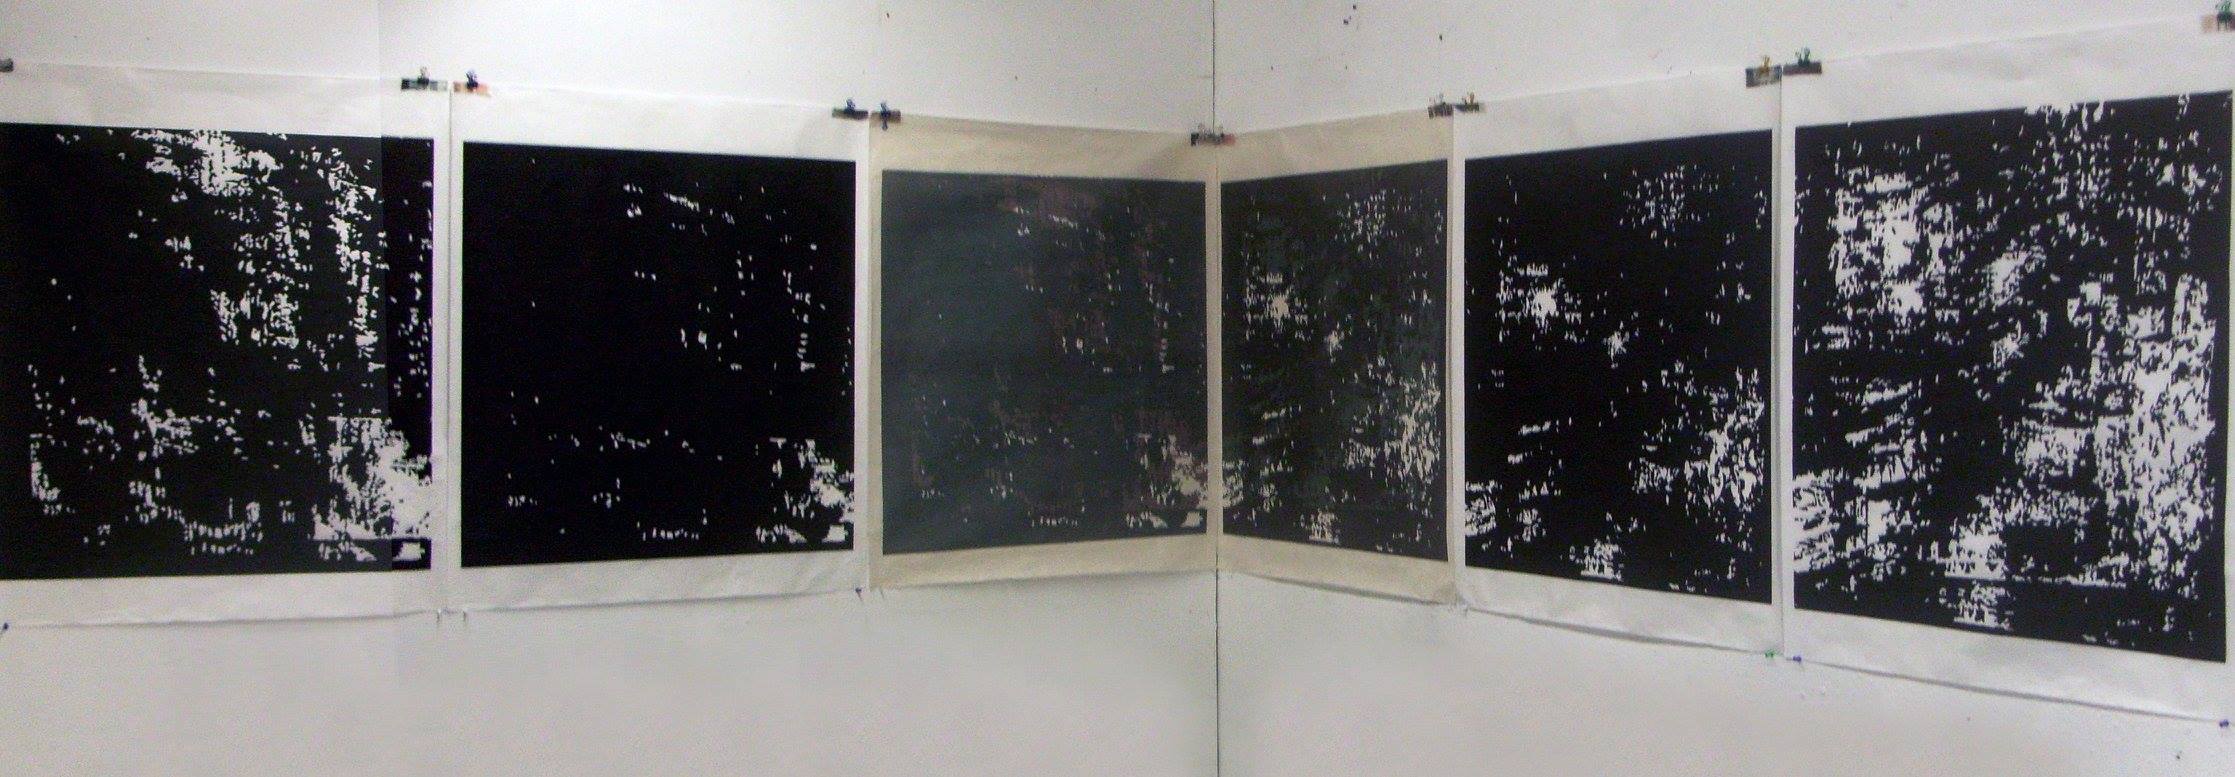 Woodcut on Japanese kozo paper, reduction print variations. Shown in Times Square Gallery, College of Art Association Show, NY, 2010 and Despacio, San José, 2011 among others